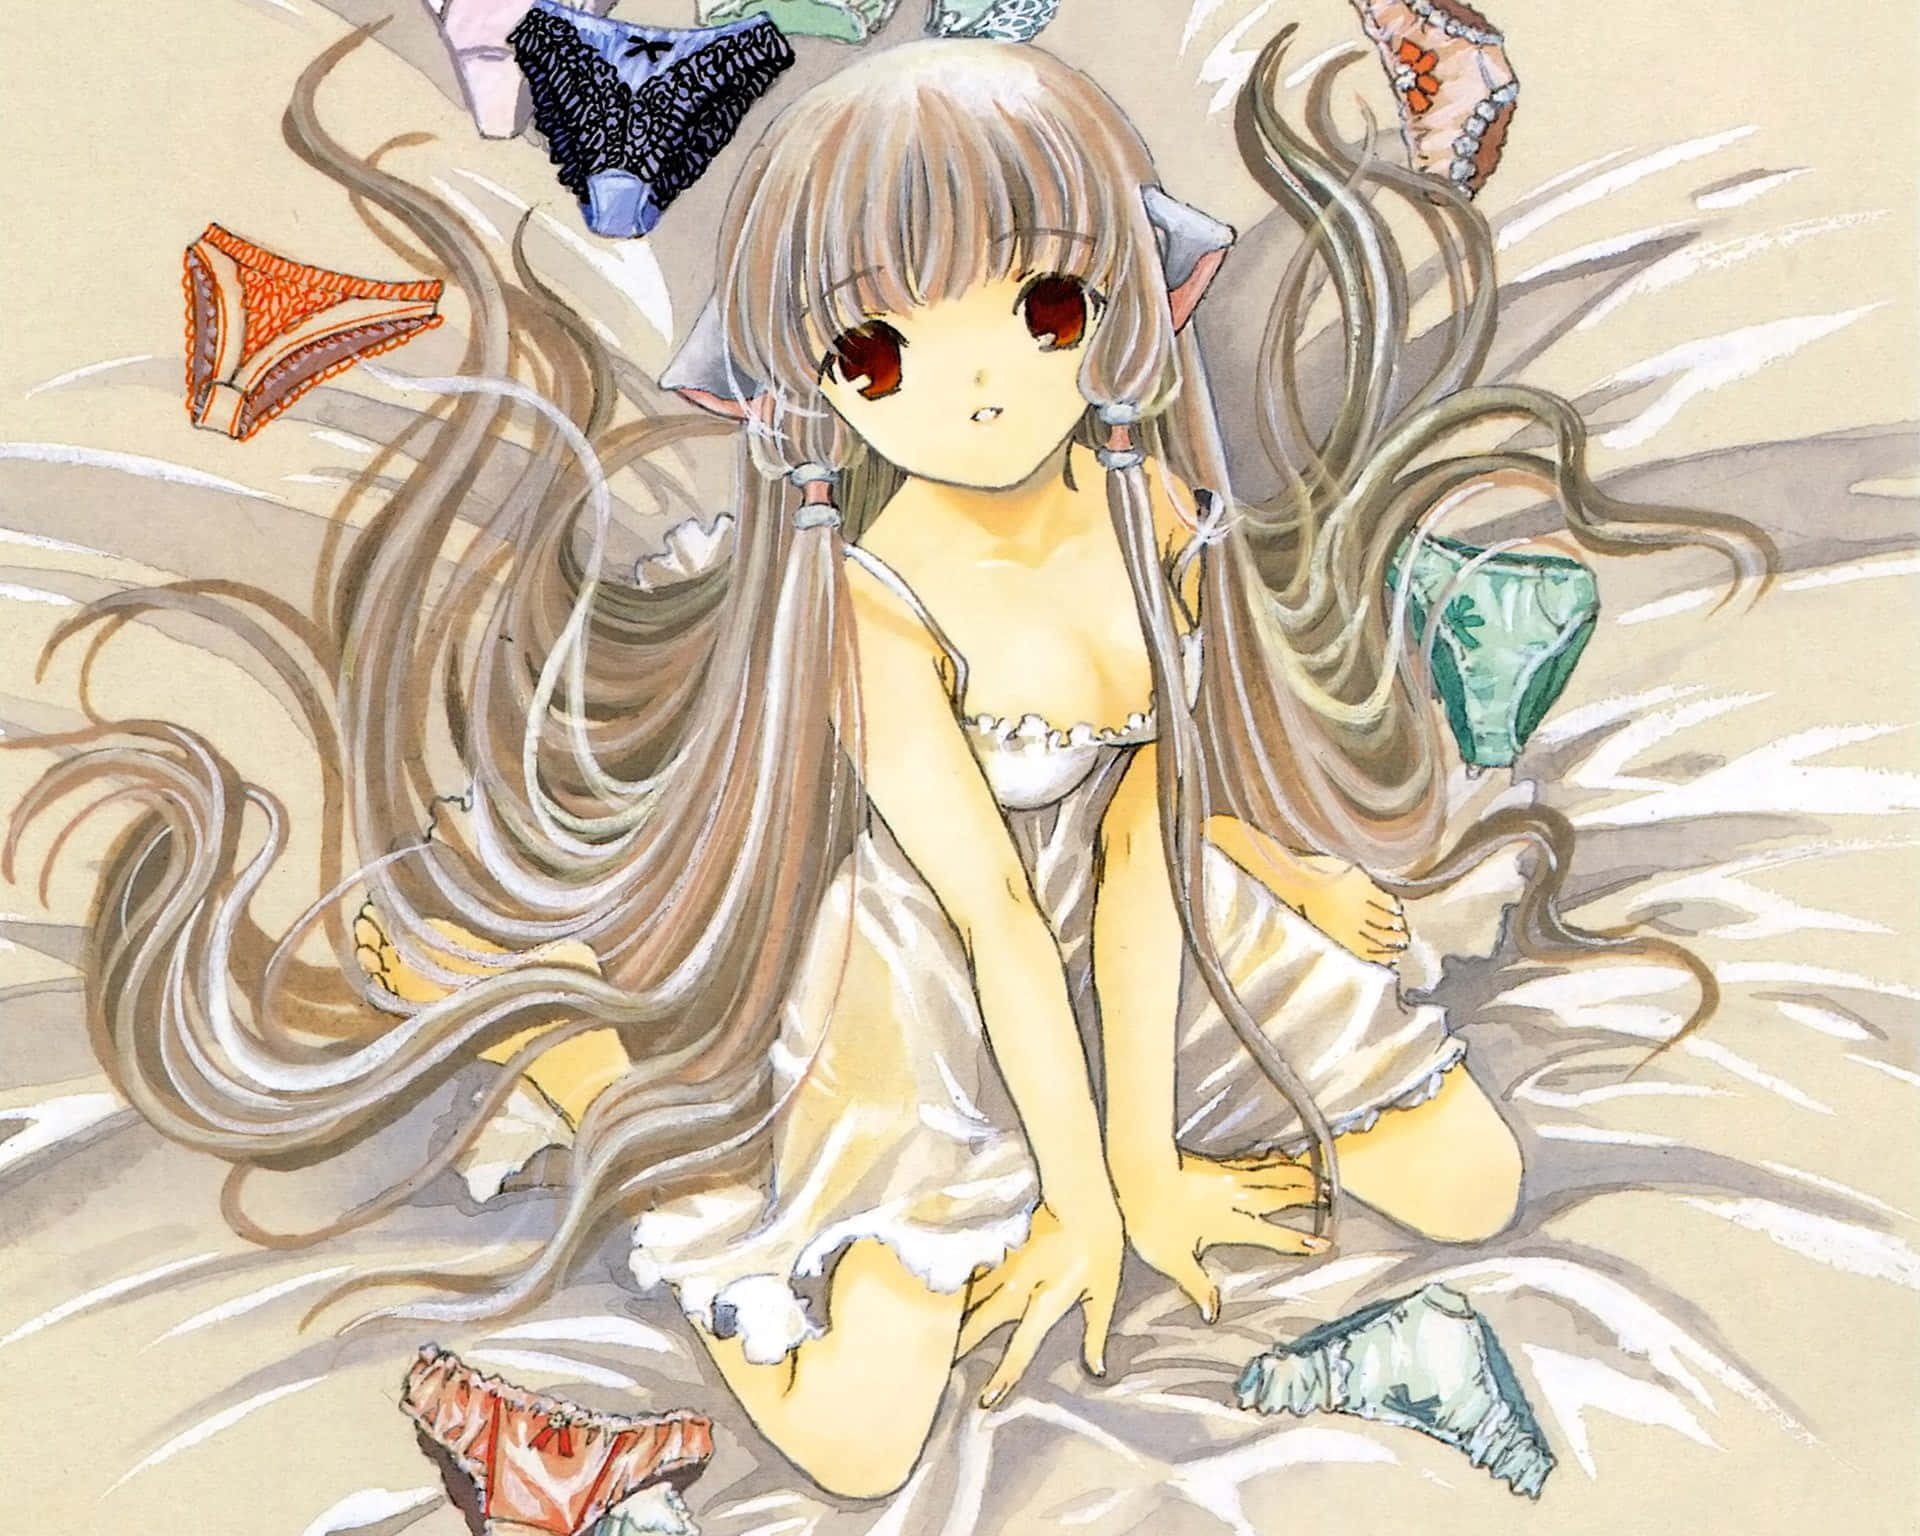 Chii from Chobits | Description: A beautiful robot girl, Chii, from Chobits anime and manga series, rests peacefully | Keywords: Chobits, Anime, Manga, Robot, Chii, Sci-Fi, Cyberpunk, Technology, Japan